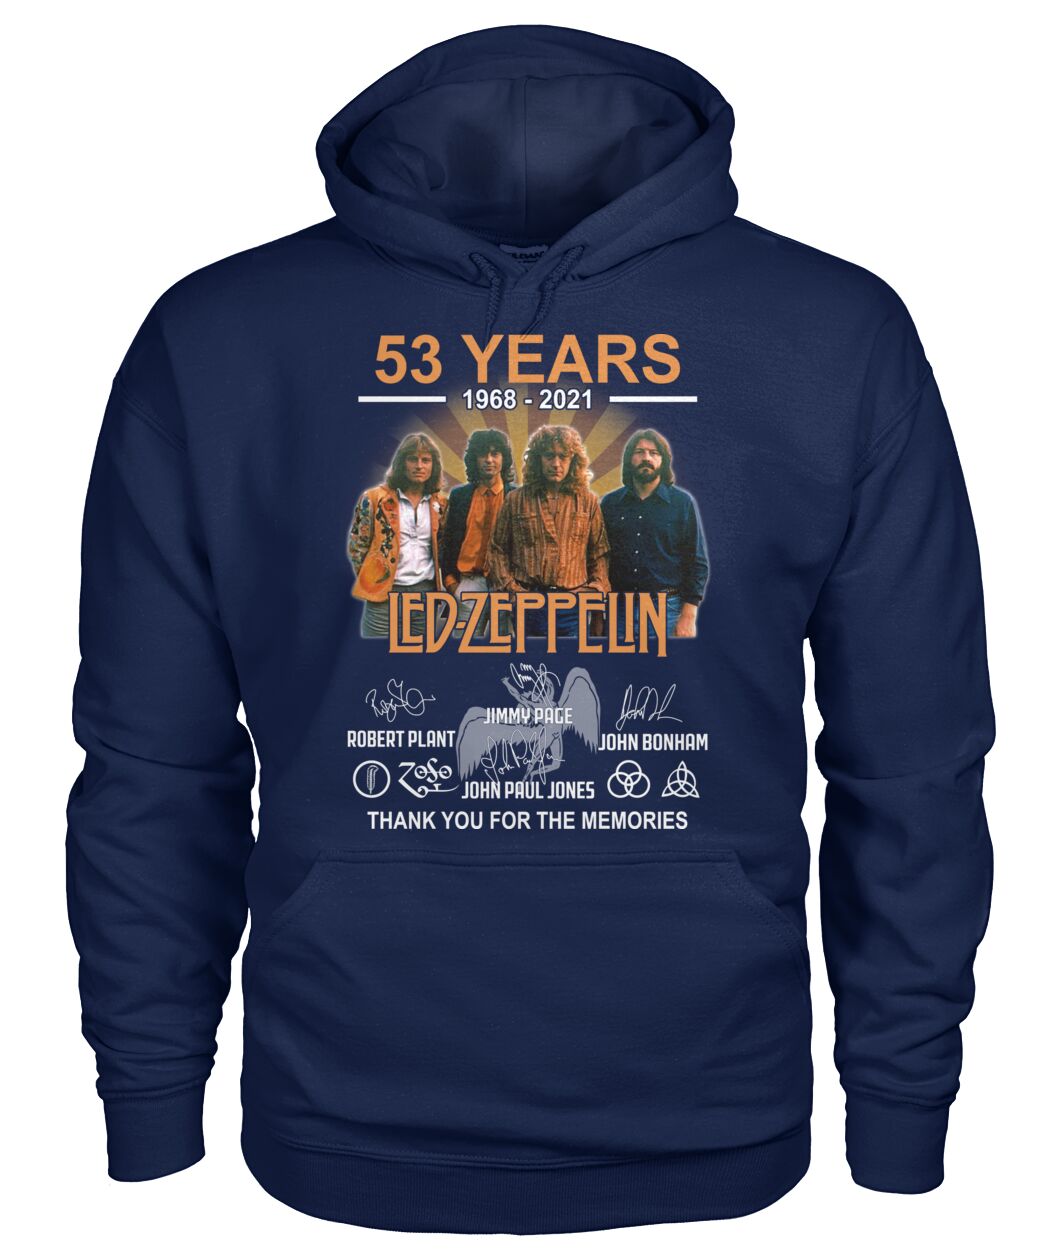 53 years Led Zeppelin signature thank you for the memories hoodie